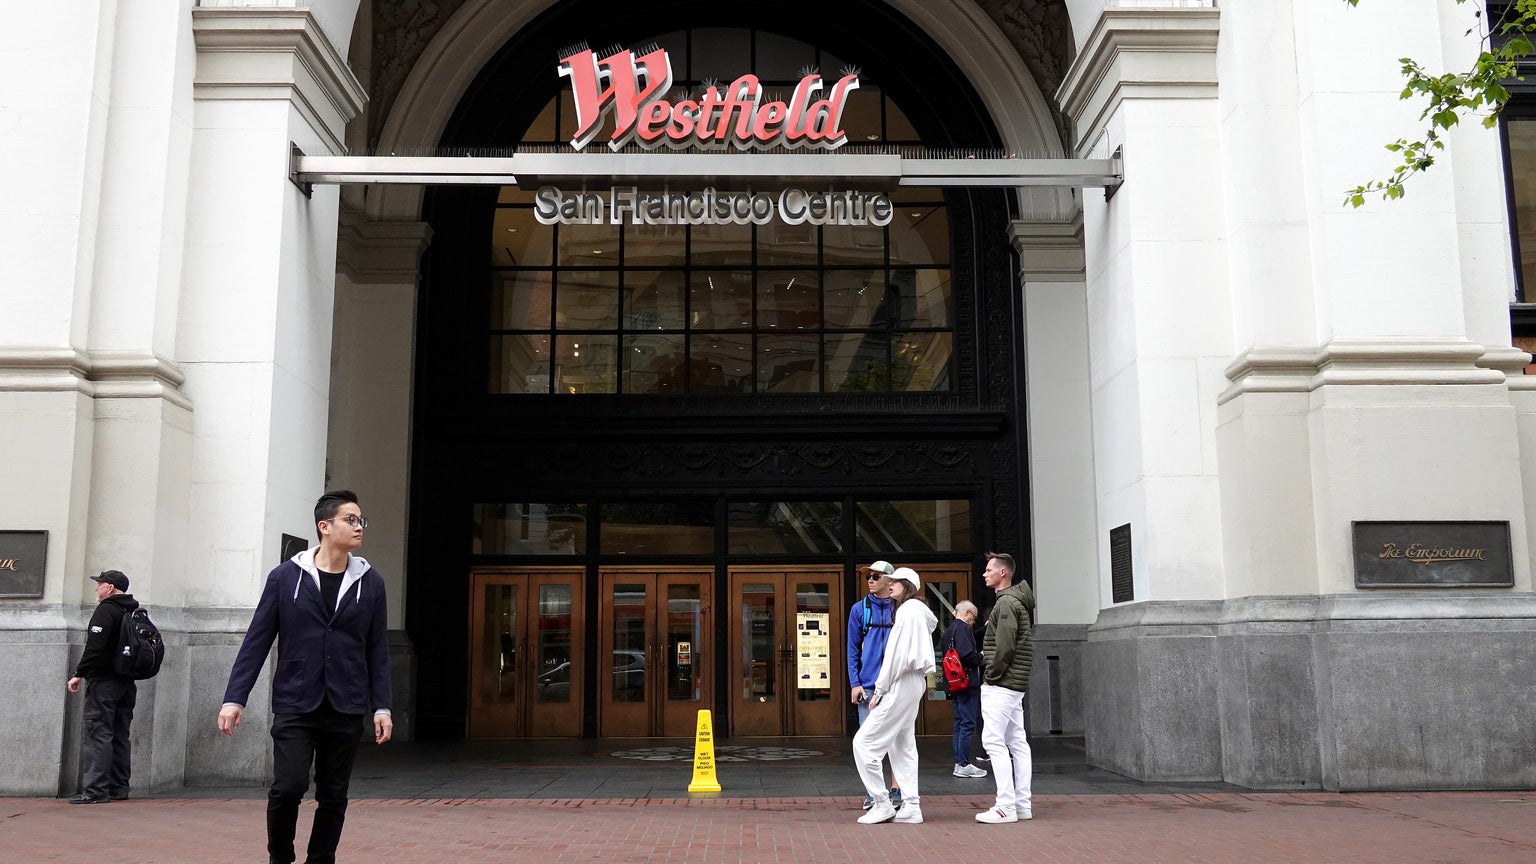 Westfield Garden State Plaza sale: Unibail may delay for redevelopment